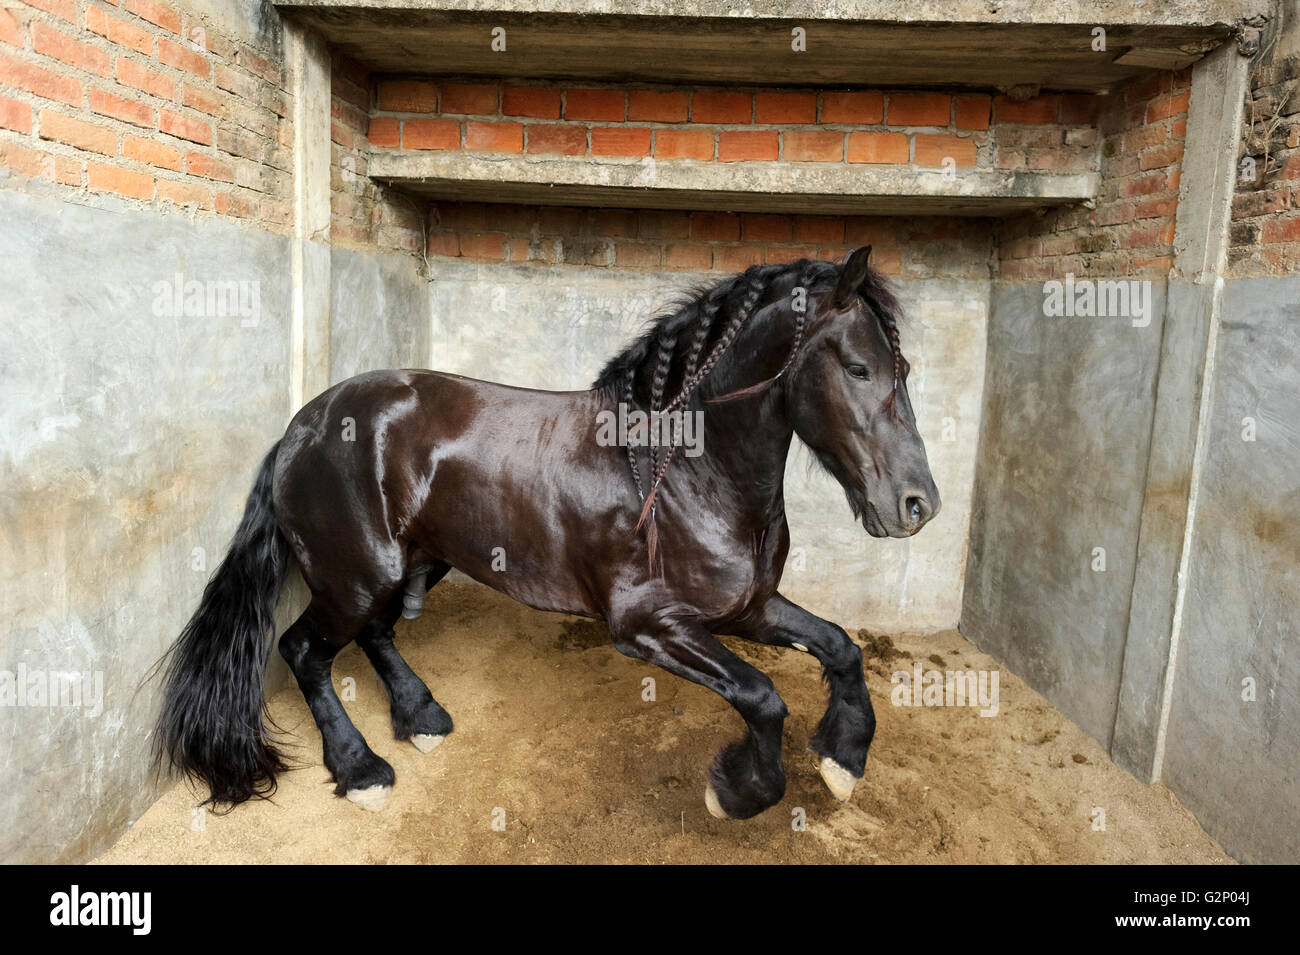 Horse is a powerful majestic stallion jumping in his confined stall. Stock Photo